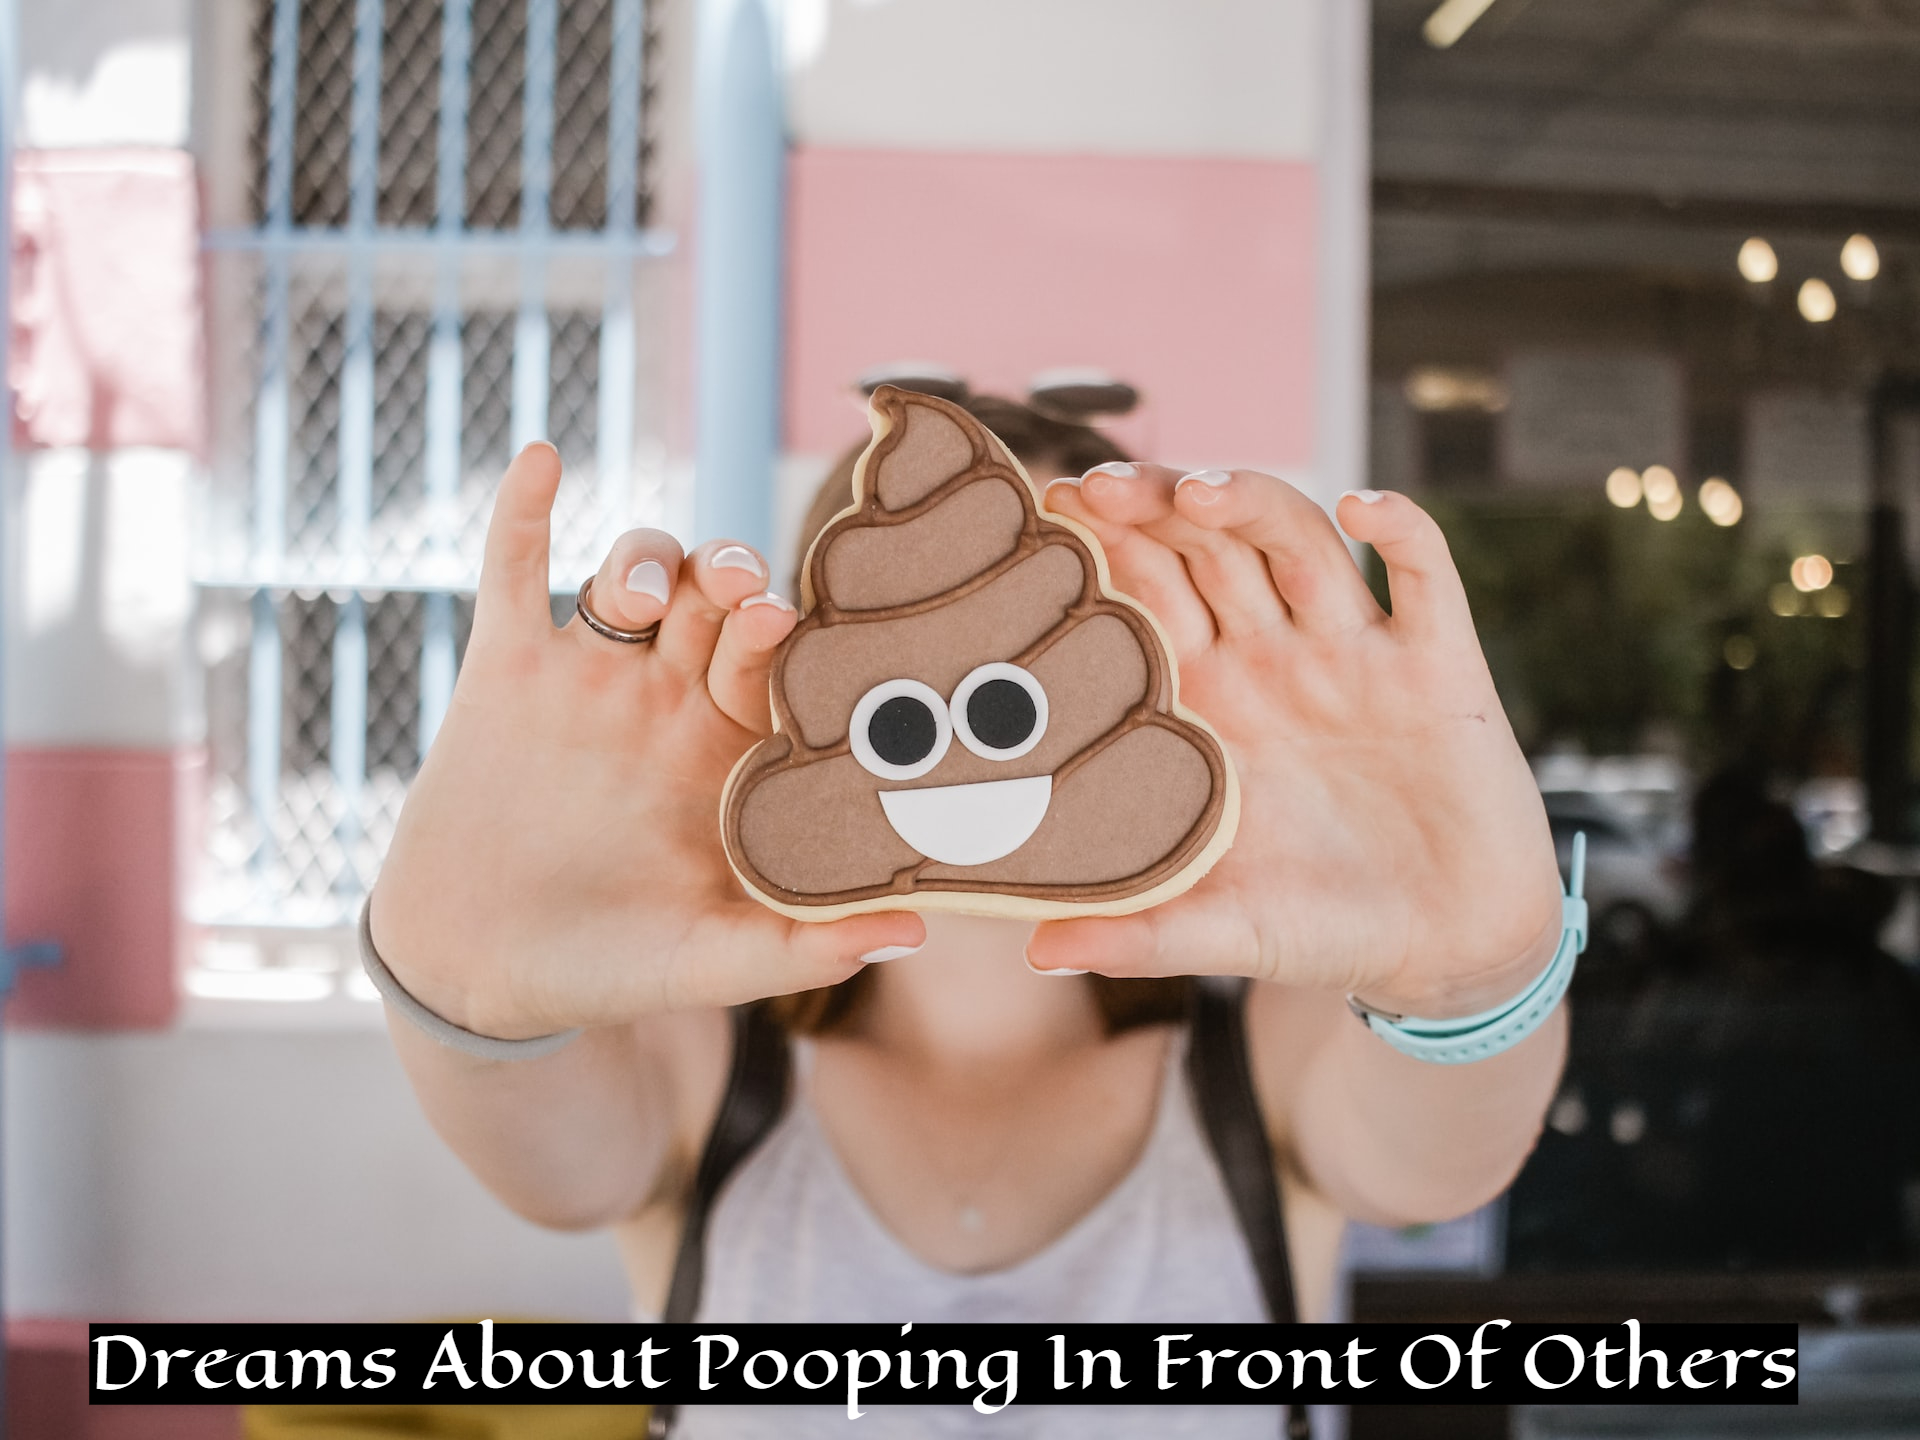 Dreams About Pooping In Front Of Others - A Sign For Light Heartedness